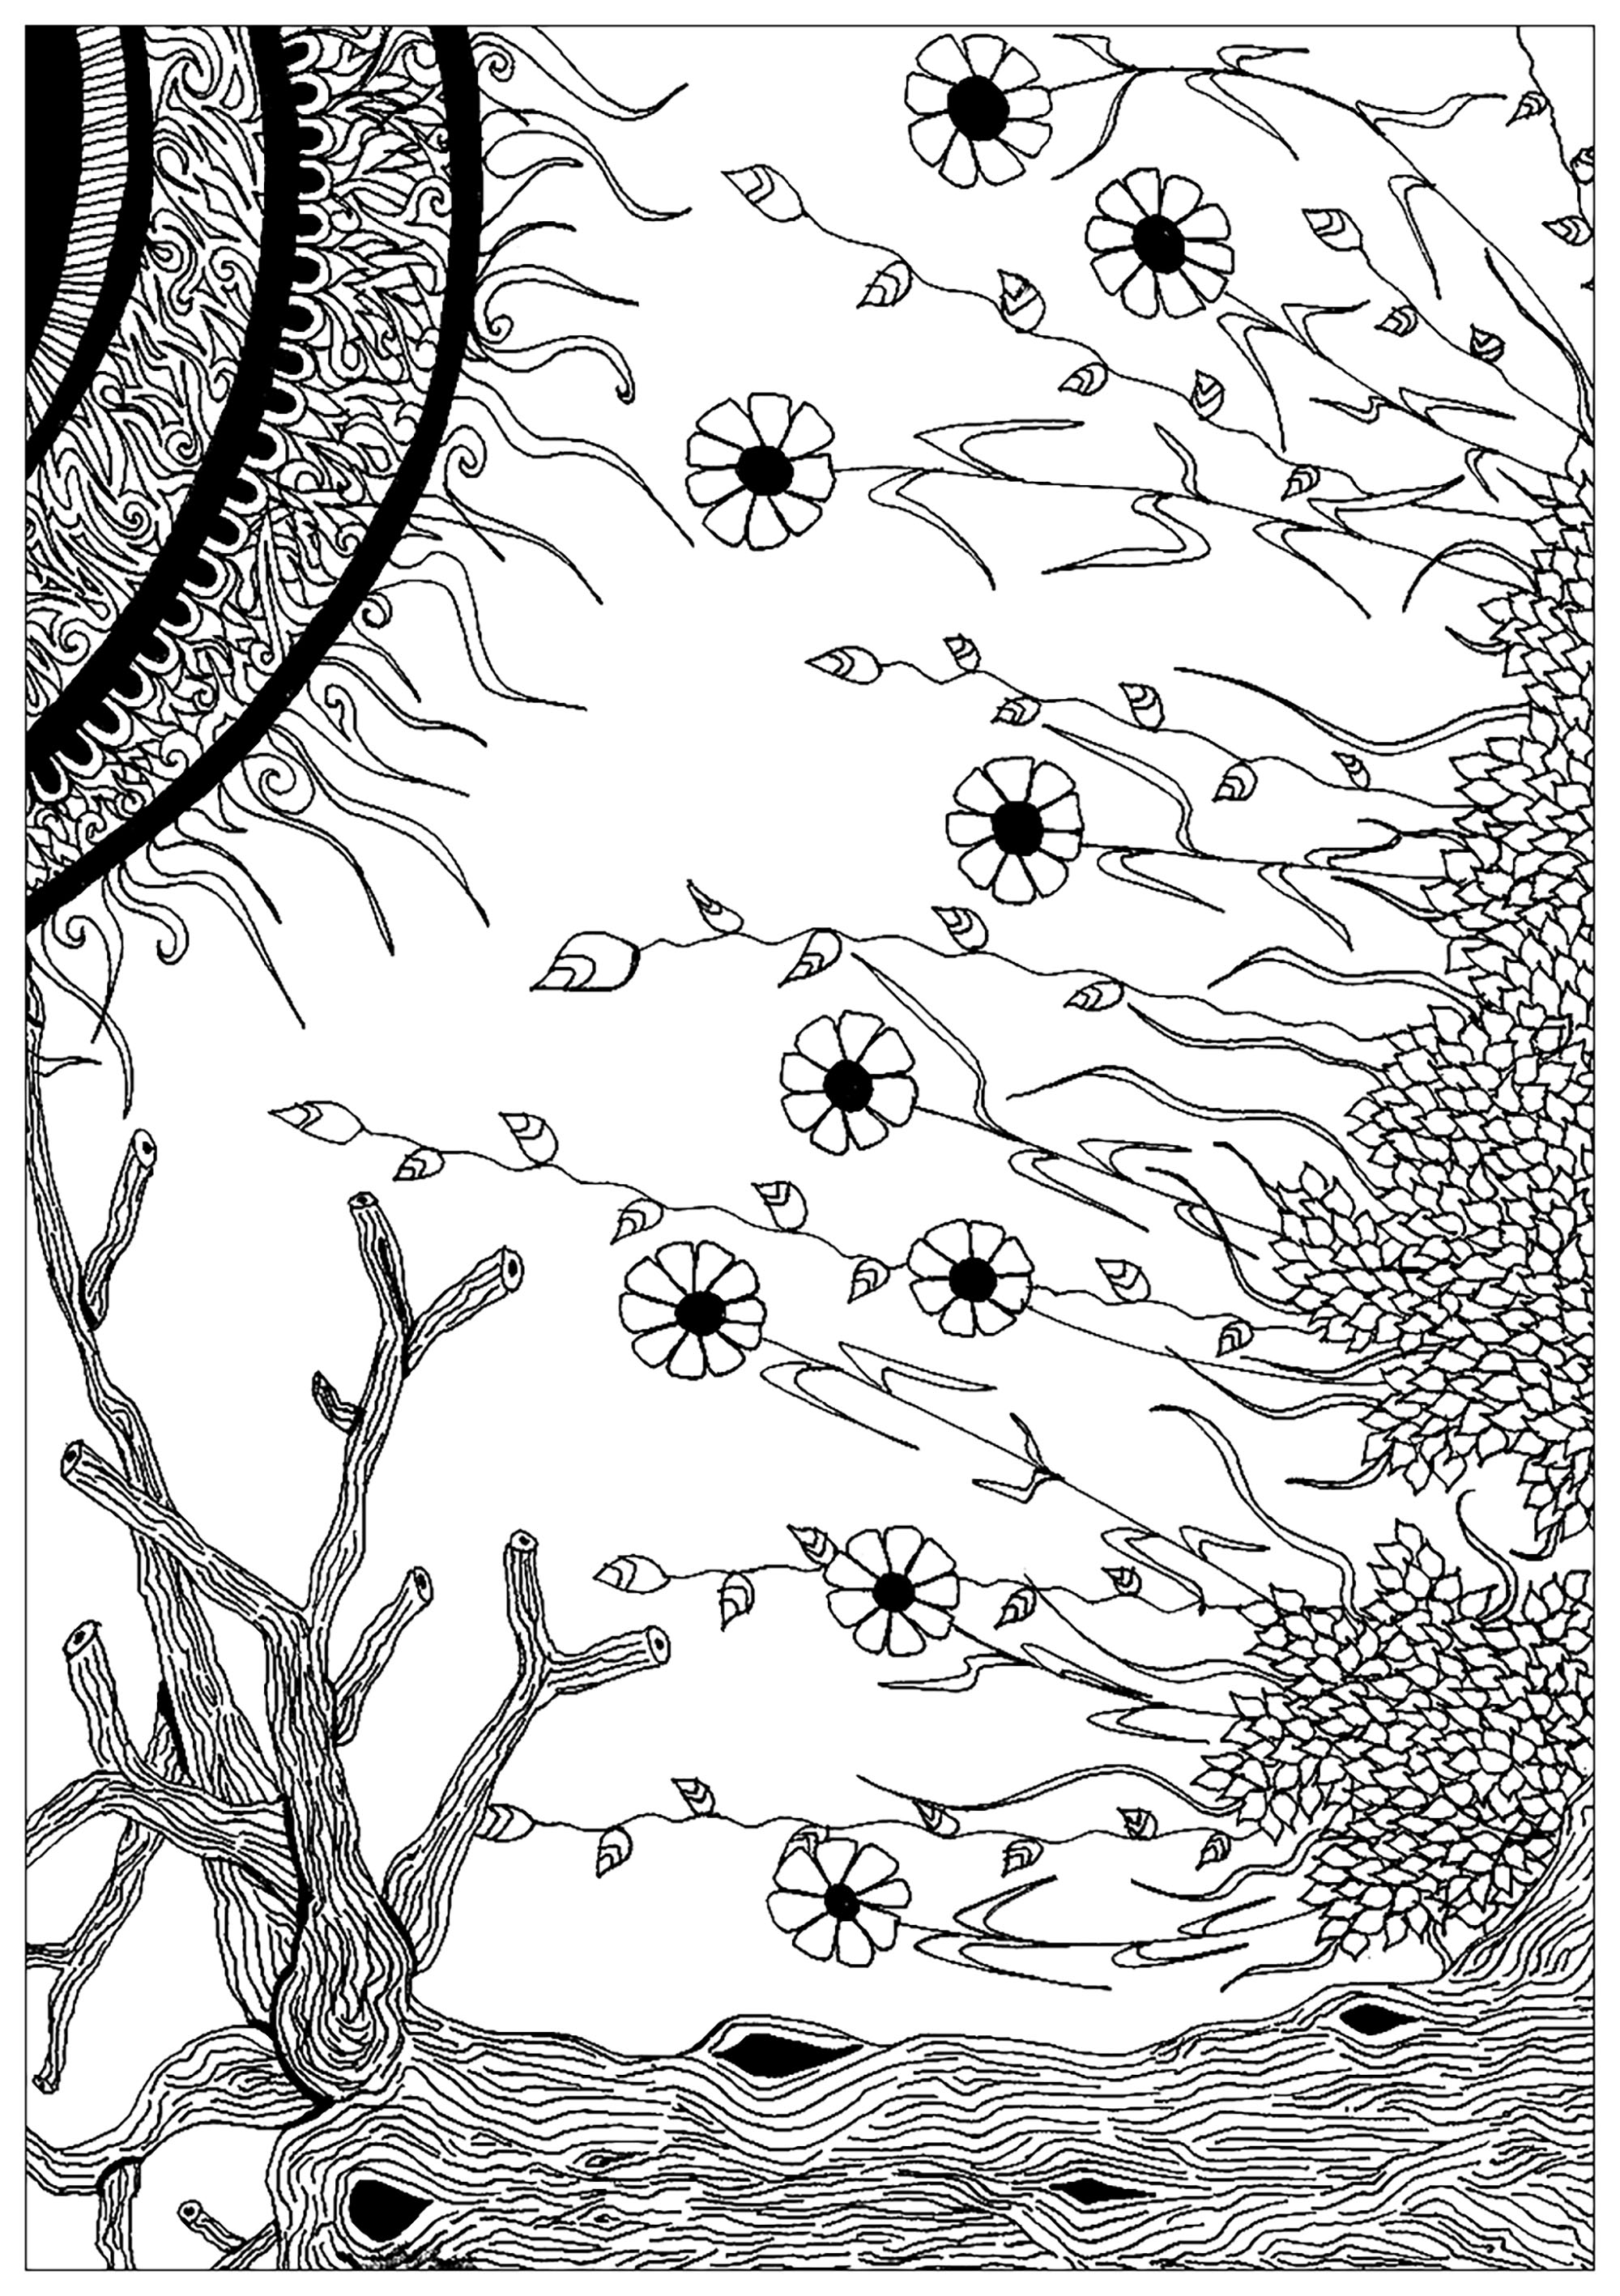 Drawing composed of plant elements, representing the meeting between spermatozoa and an egg, Artist : Elanise Art